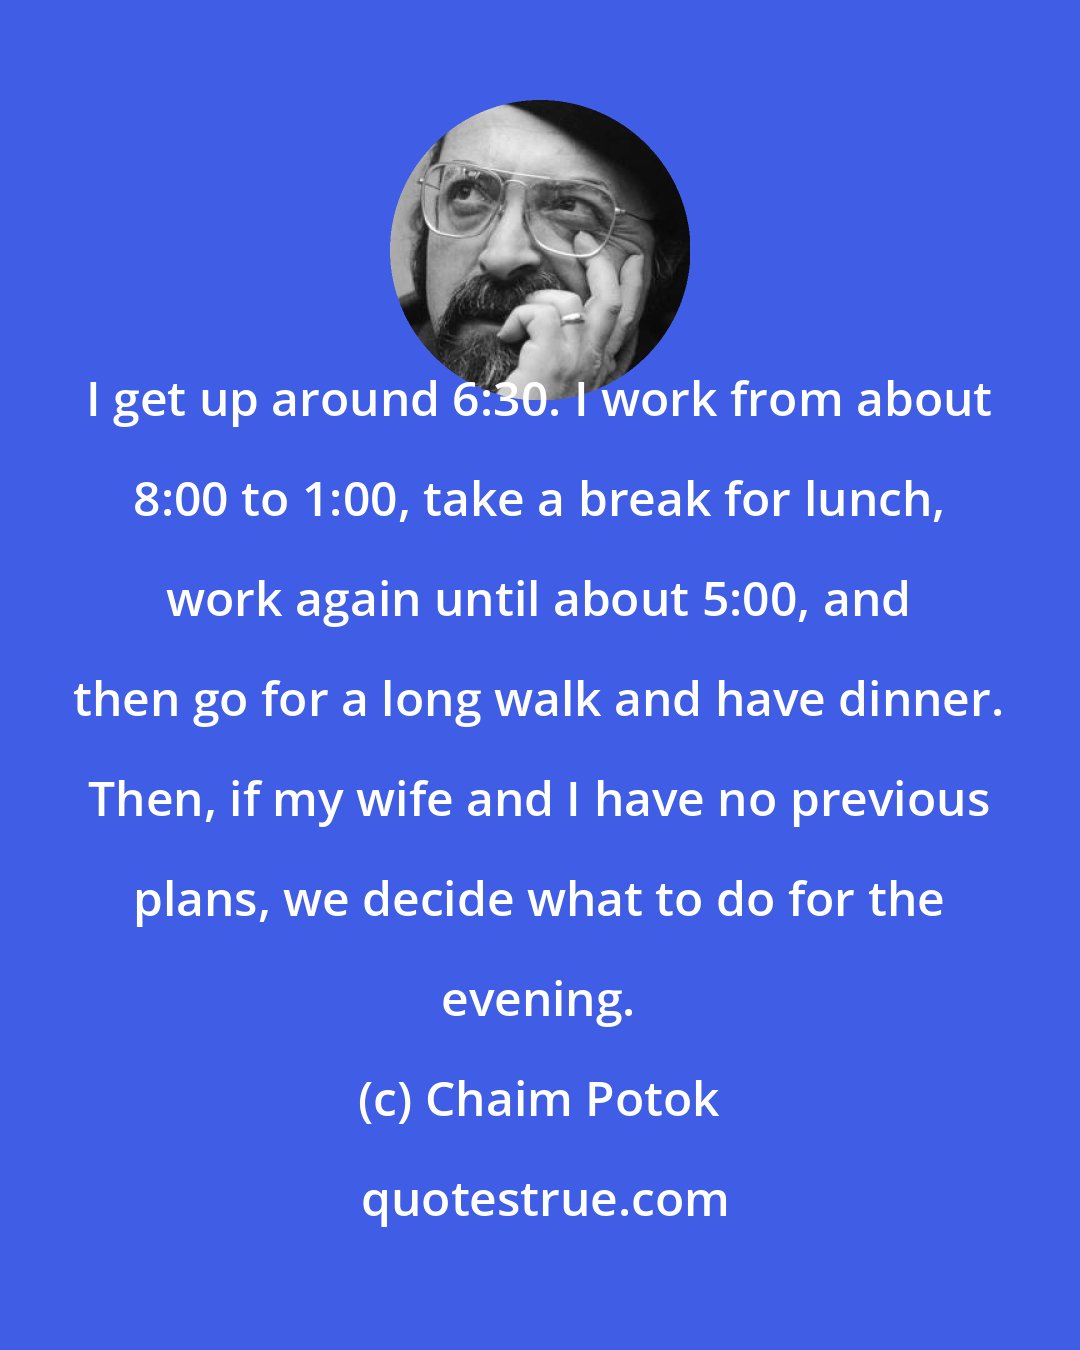 Chaim Potok: I get up around 6:30. I work from about 8:00 to 1:00, take a break for lunch, work again until about 5:00, and then go for a long walk and have dinner. Then, if my wife and I have no previous plans, we decide what to do for the evening.